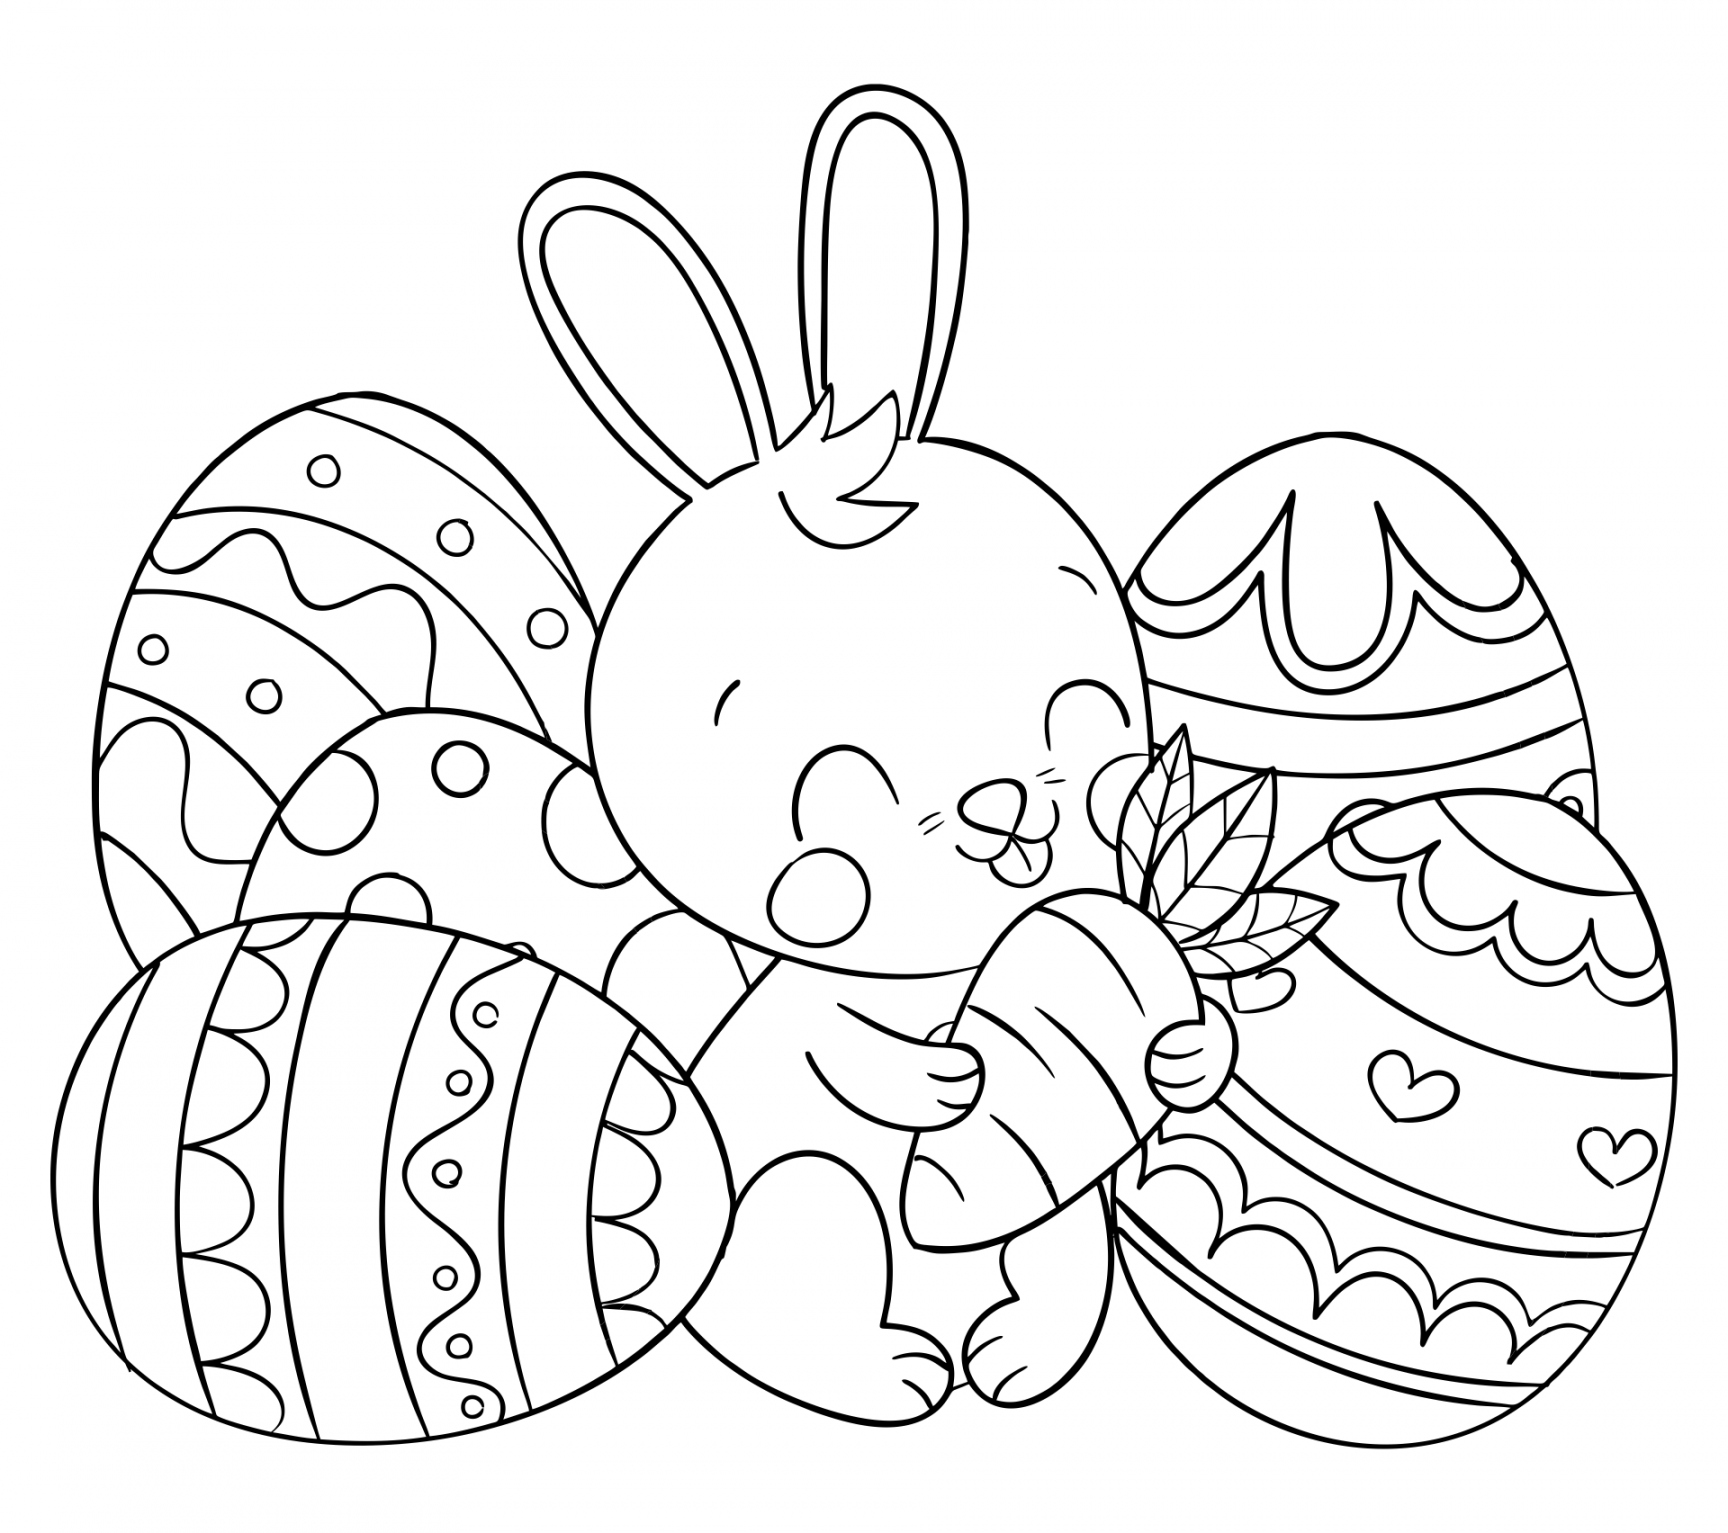 Easter Coloring Pages Printable Free - Printable -  Best Free Printable Easter Egg Coloring Page - printablee